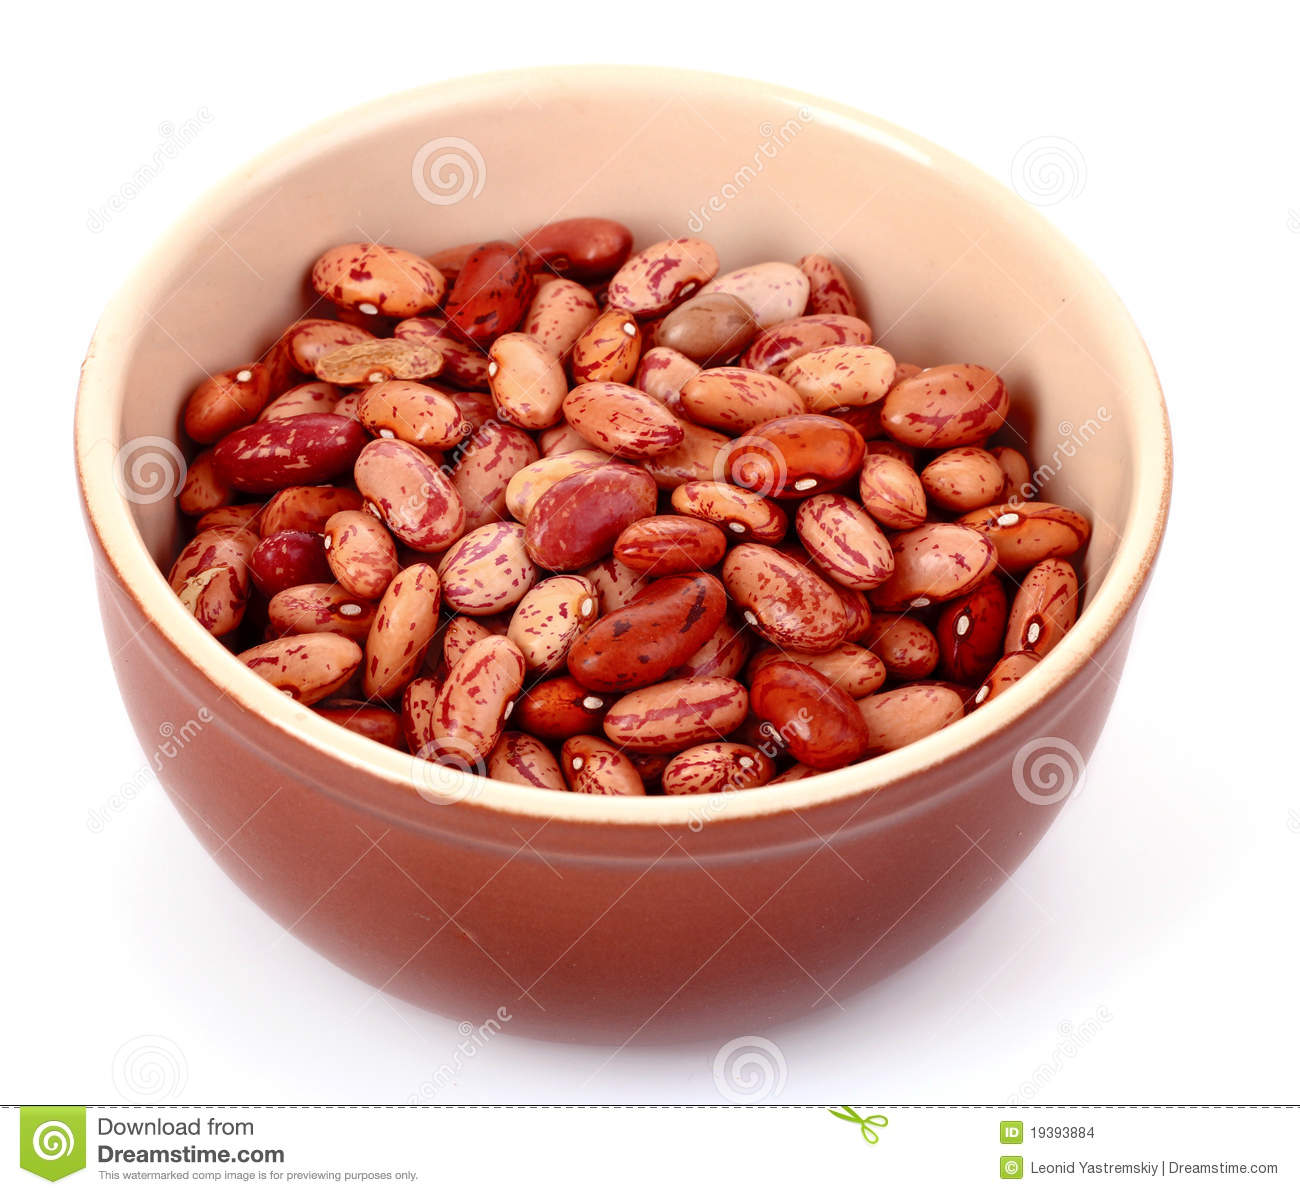 Beans In Bowl Isolated Stock Images   Image  19393884